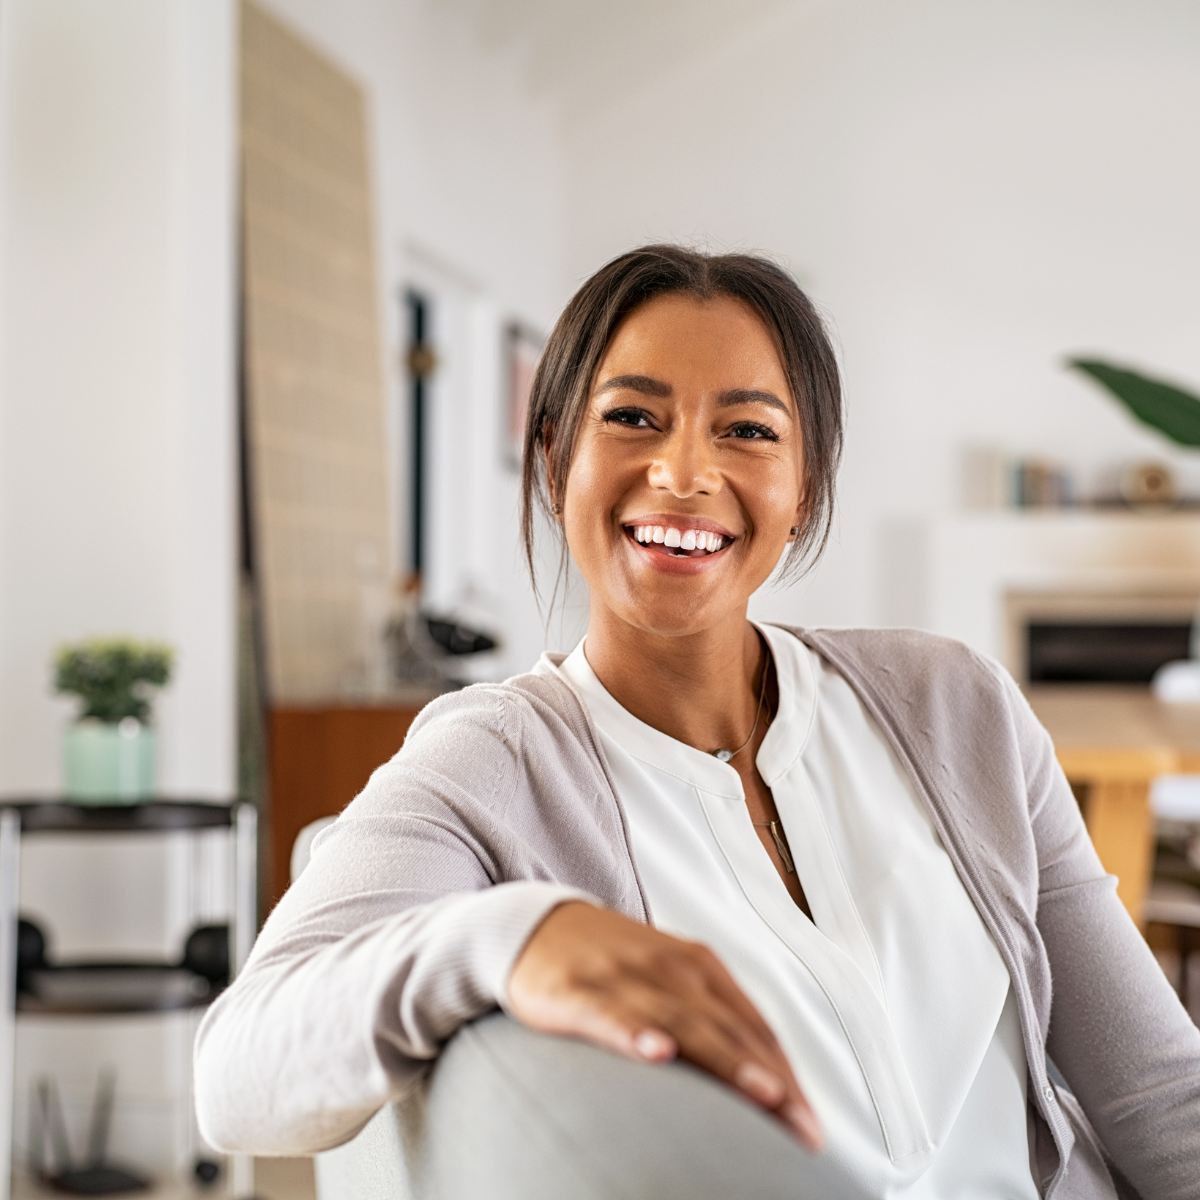 Woman smiling on kitchen chair